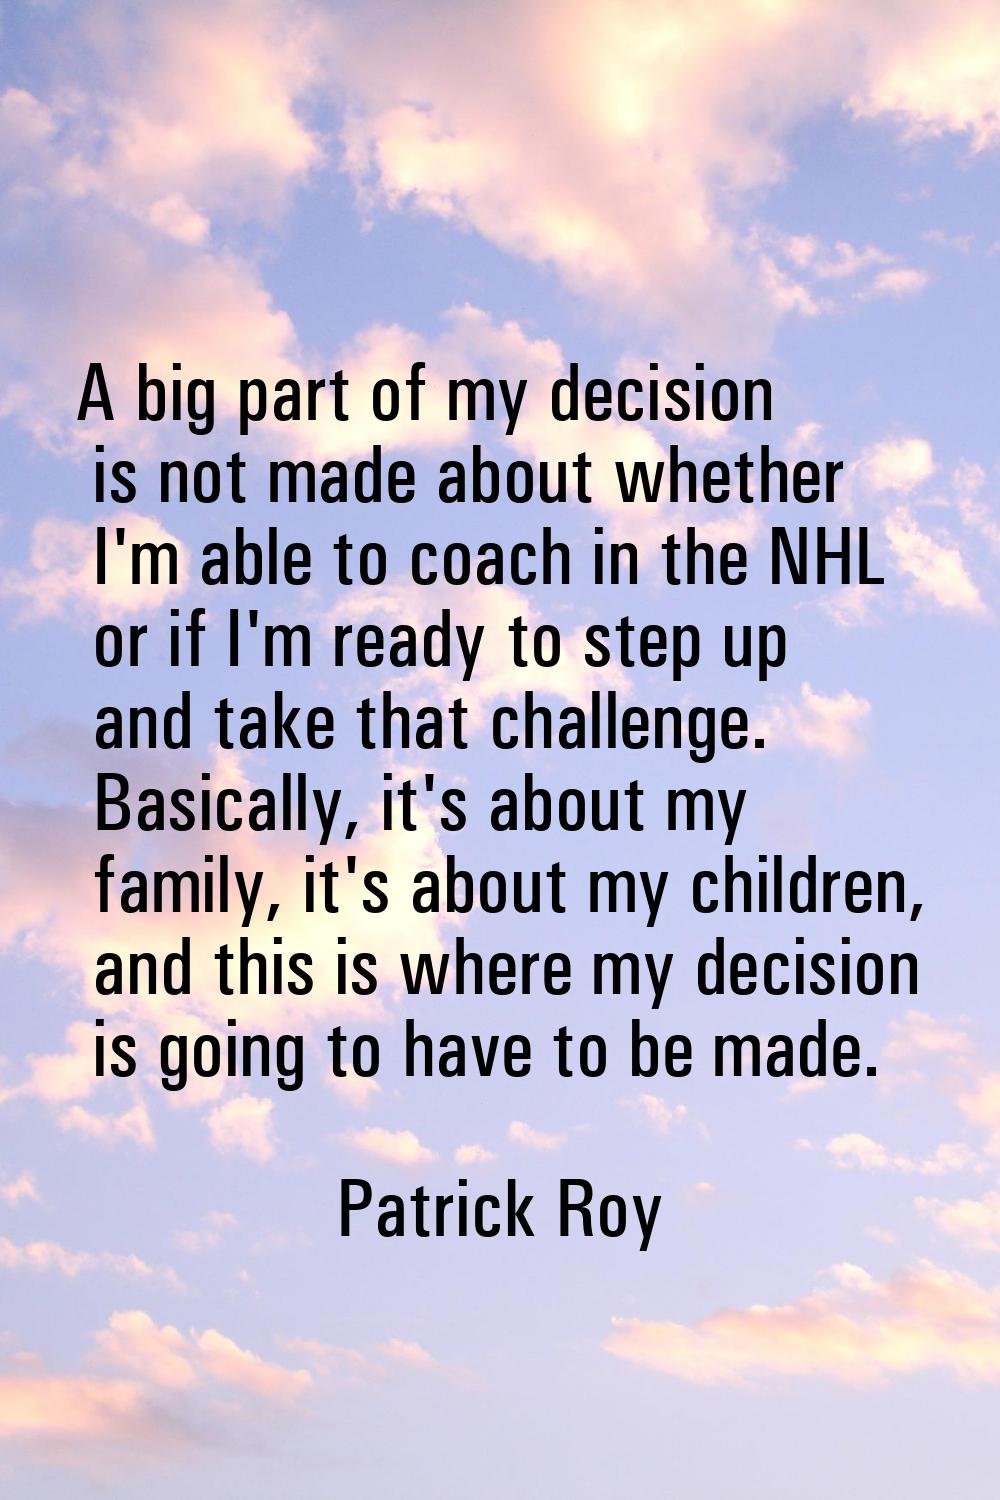 A big part of my decision is not made about whether I'm able to coach in the NHL or if I'm ready to